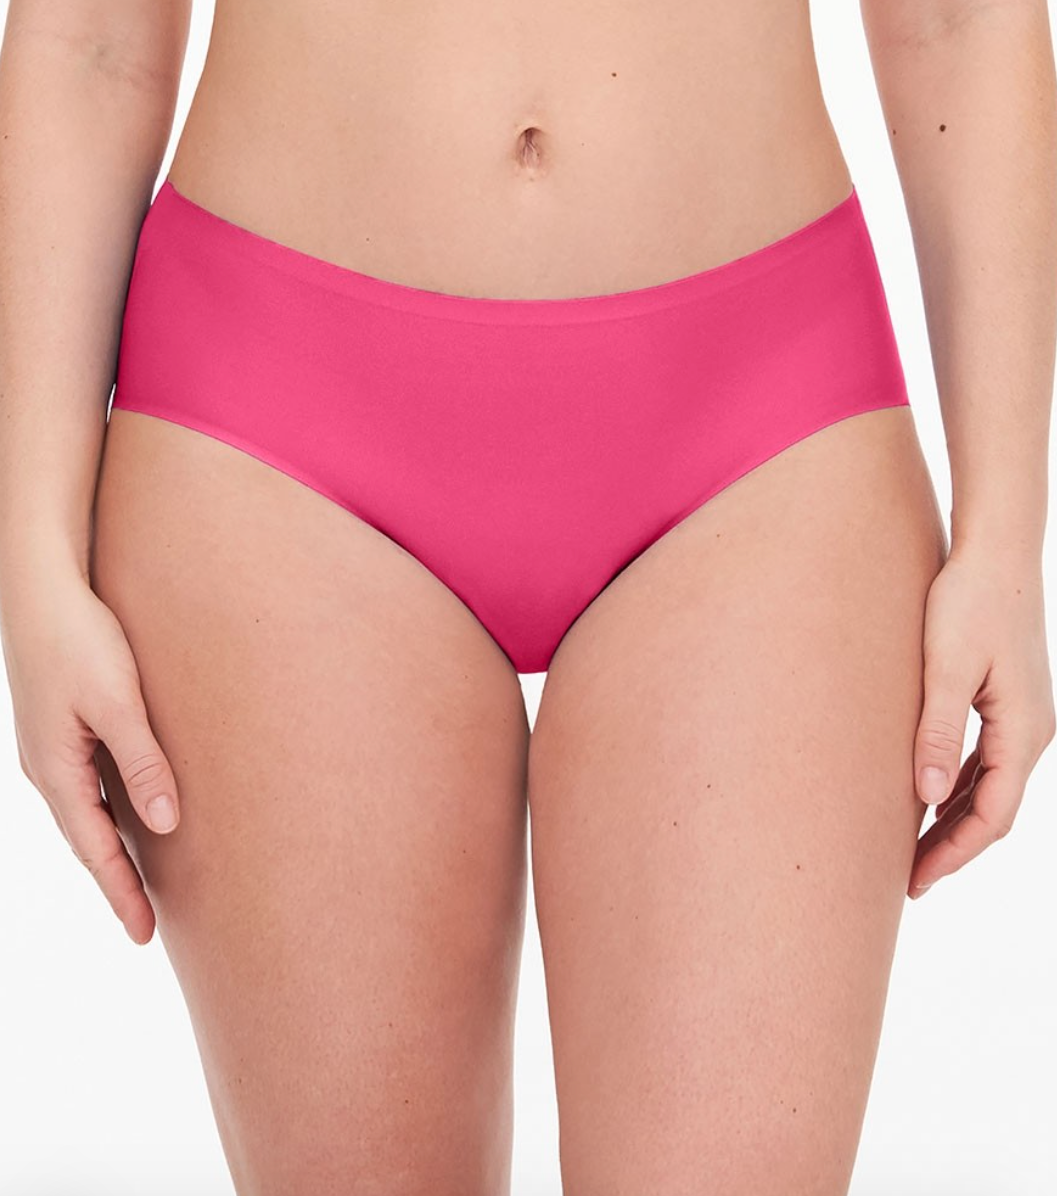 SoftStretch Hipster - Bright Pink